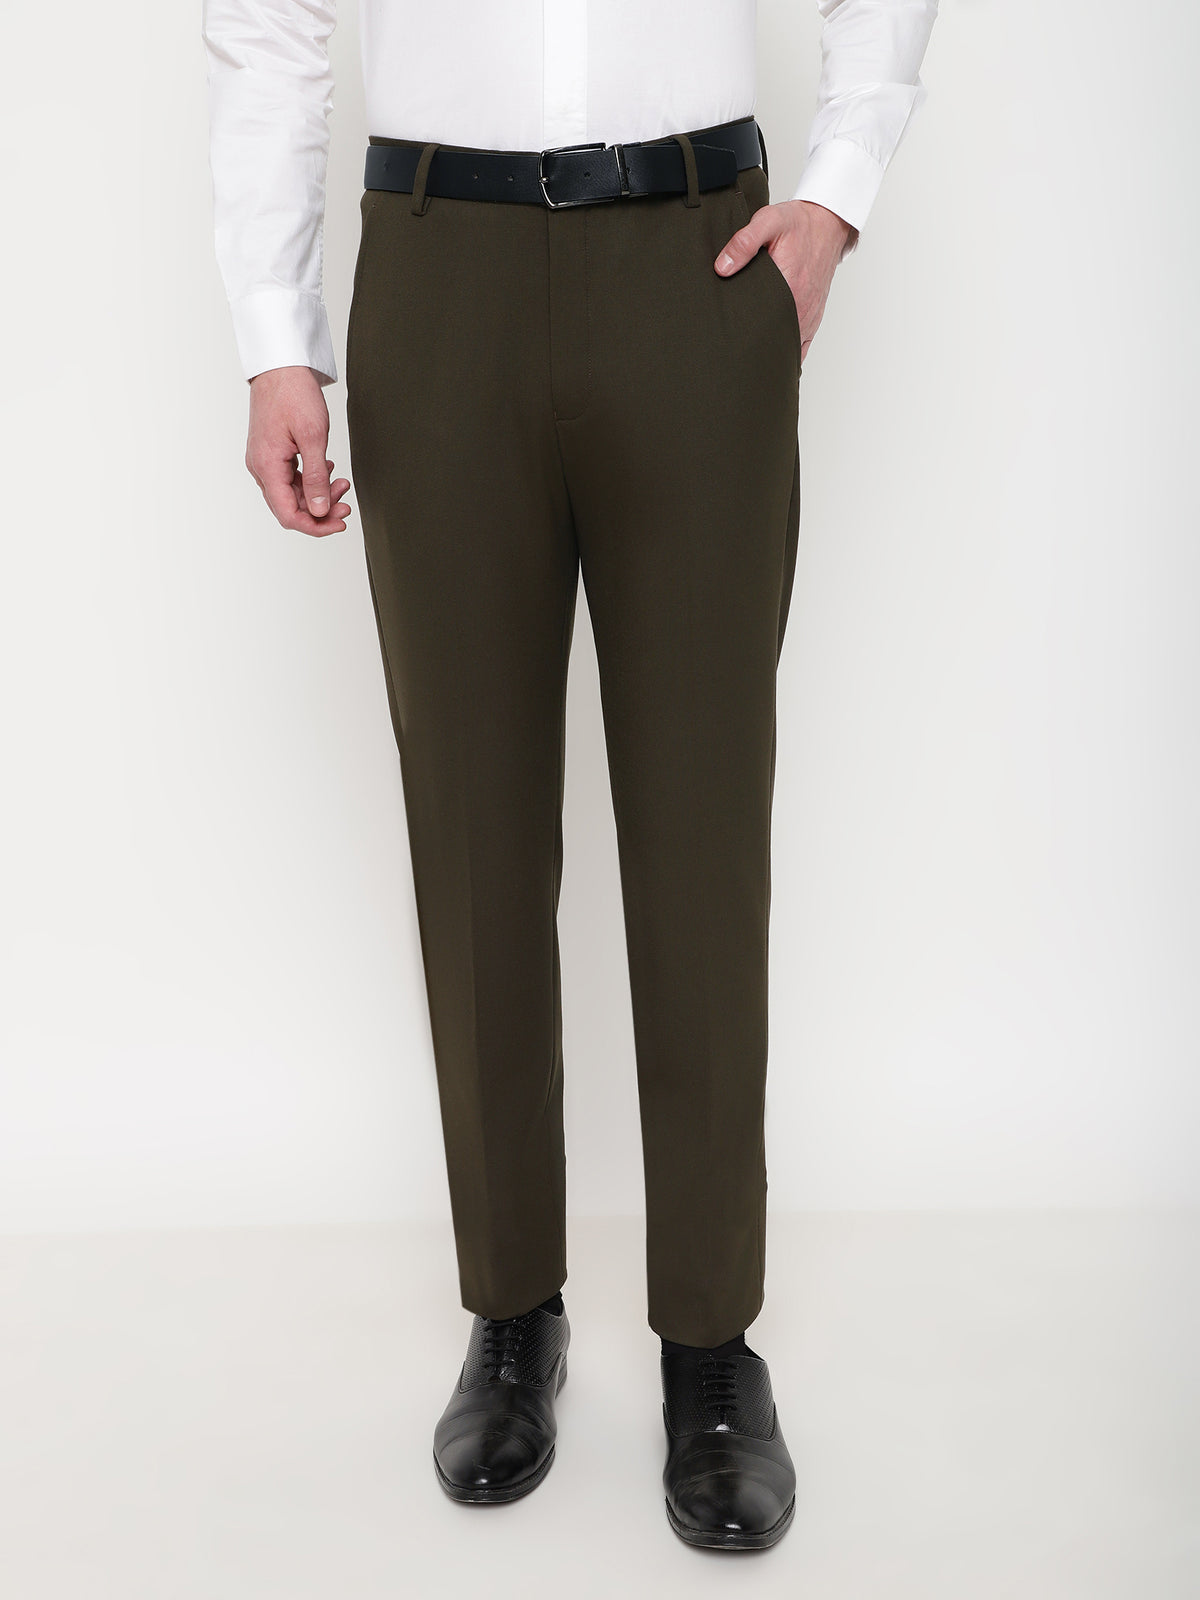 4-Way Stretch Formal Trousers in Jade Olive- Slim Fit